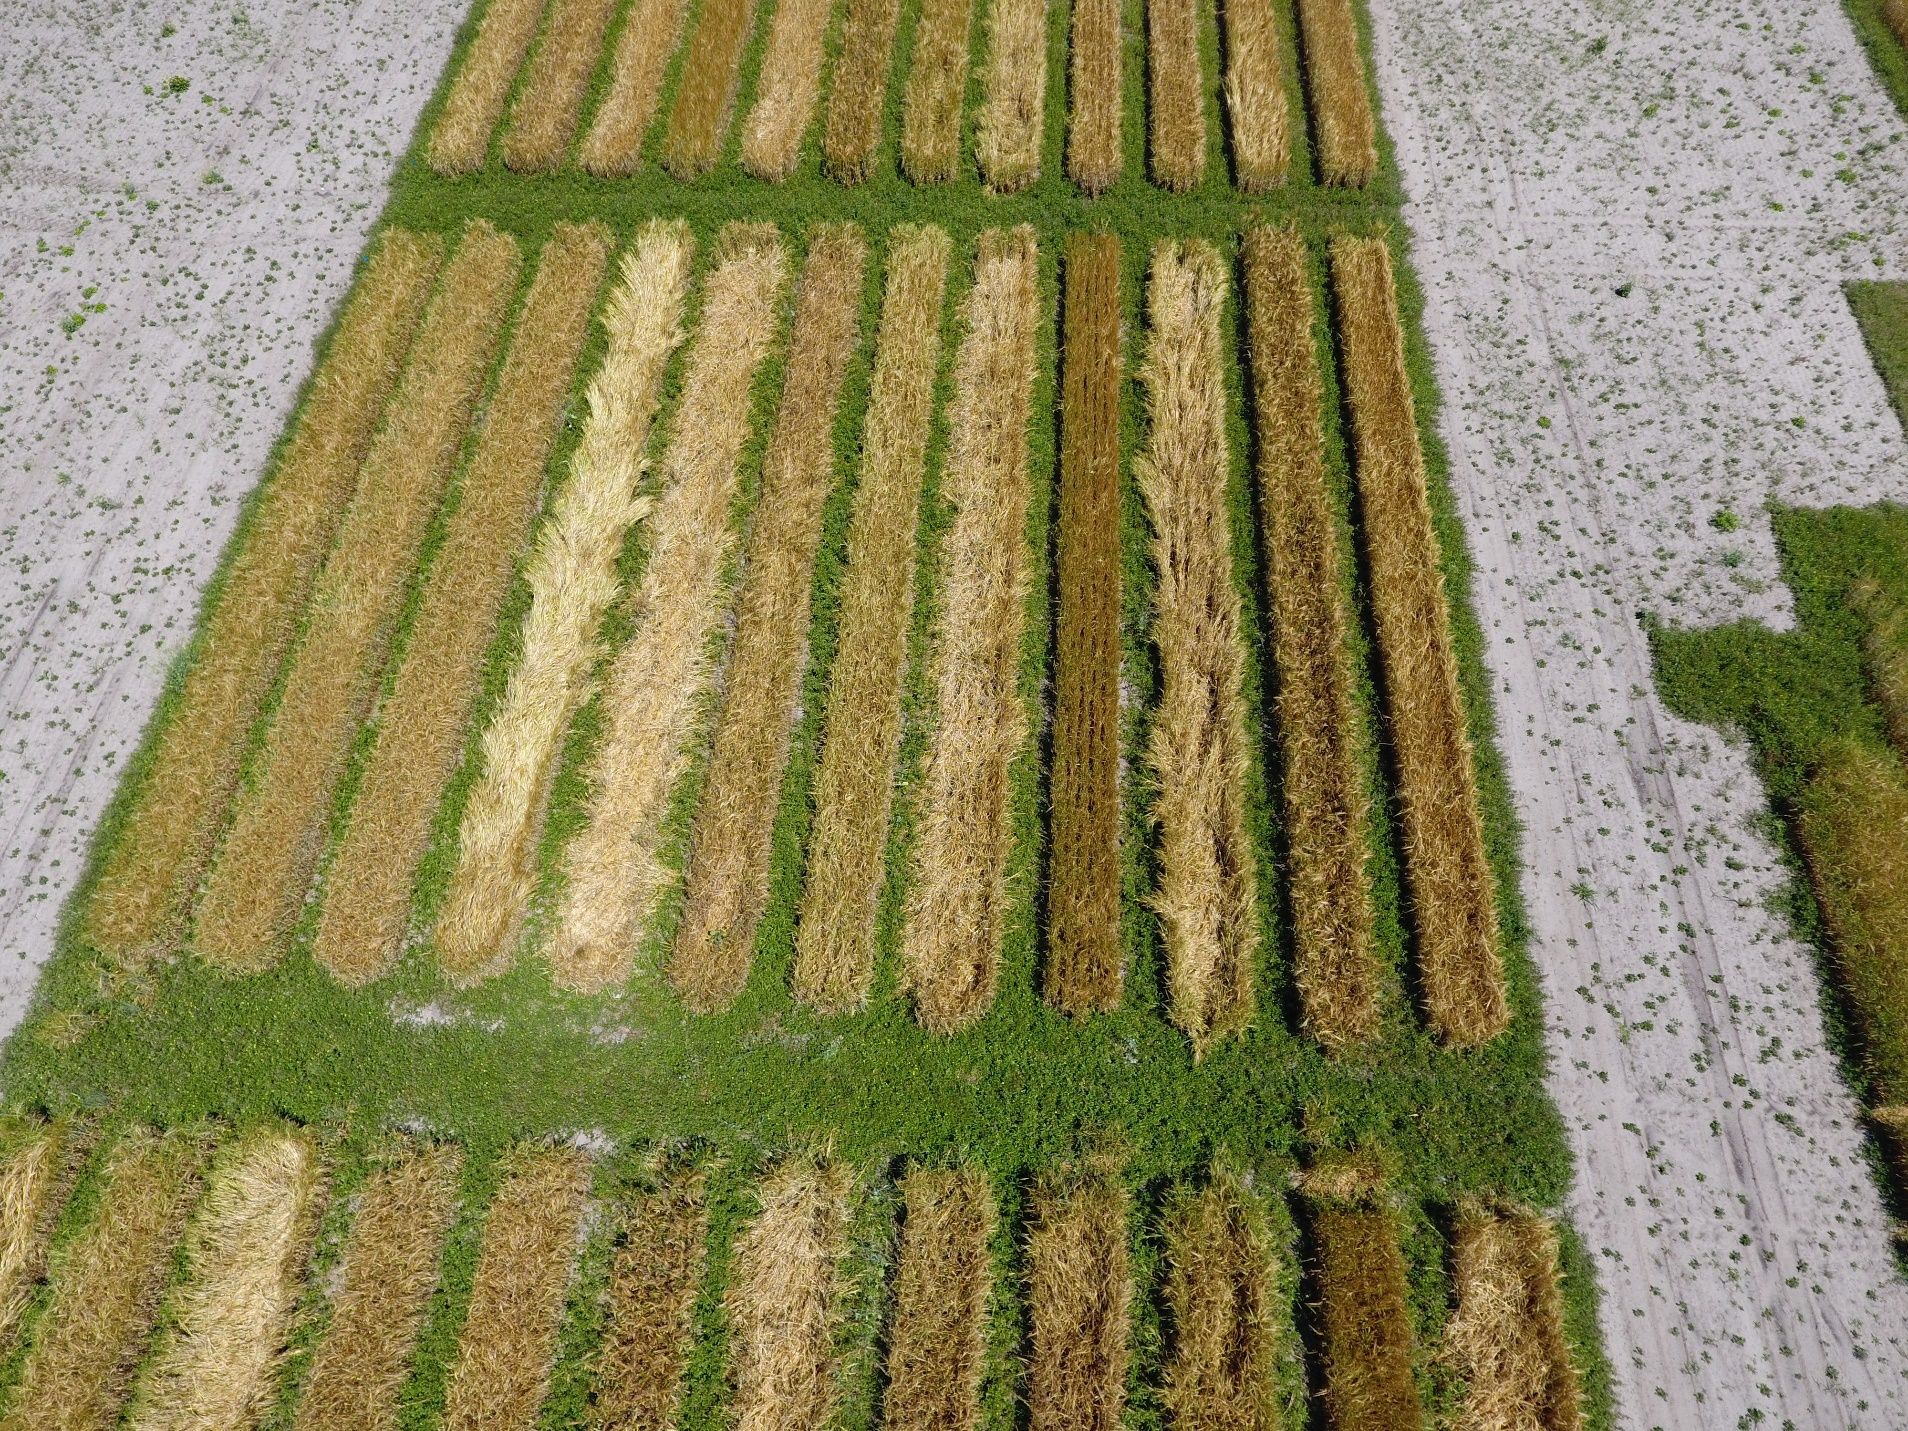 Aerial view of mature barley plots with stem breakage present after 60+ mph wind gusts on 31 March 2020, Live Oak, FL. 